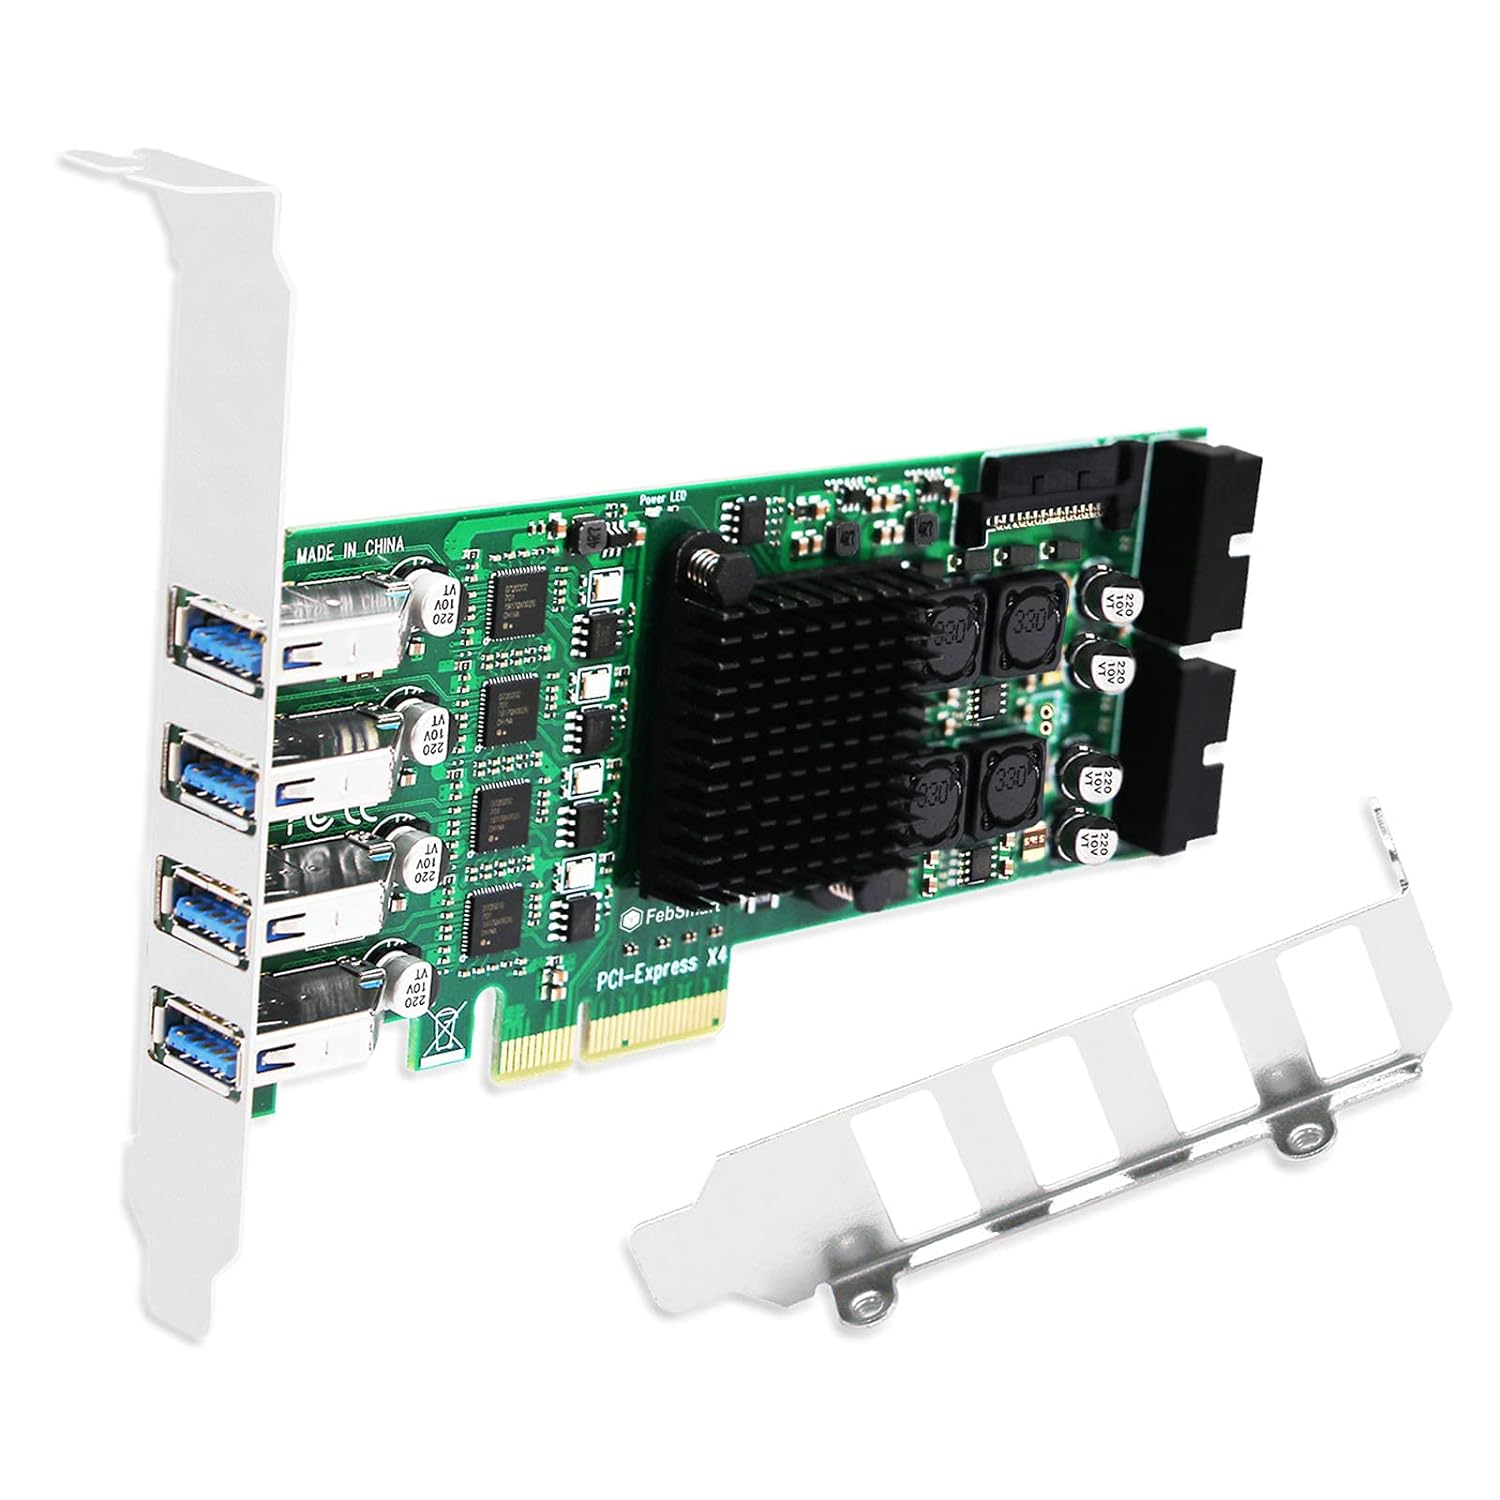 FebSmart 4 Channel 8 Ports PCI Express Superspeed USB 3.0 Card,4 Dedicated 5Gbps Channels 20Gbps Total Banwidth,Build in Self-Powered Technology,No Need Additional Power Supply (FS-4C-U8S-Pro)